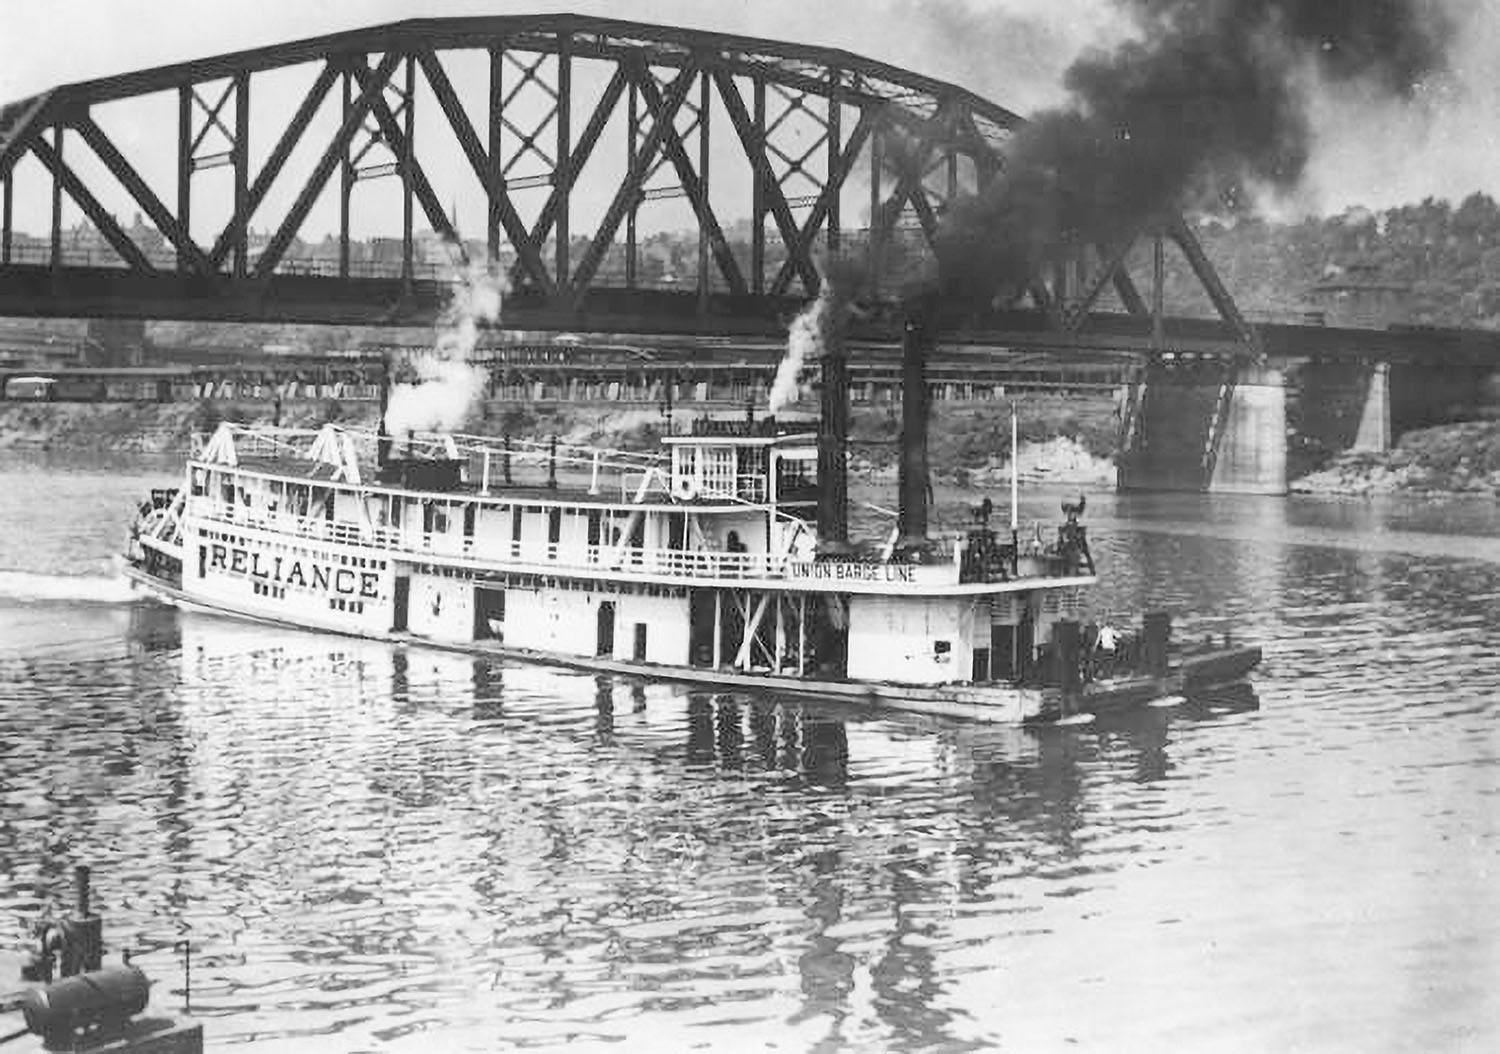 The Reliance at the Standard Terminal at Pittsburgh, 1925. (Dan Owen Boat Photo Museum collection)